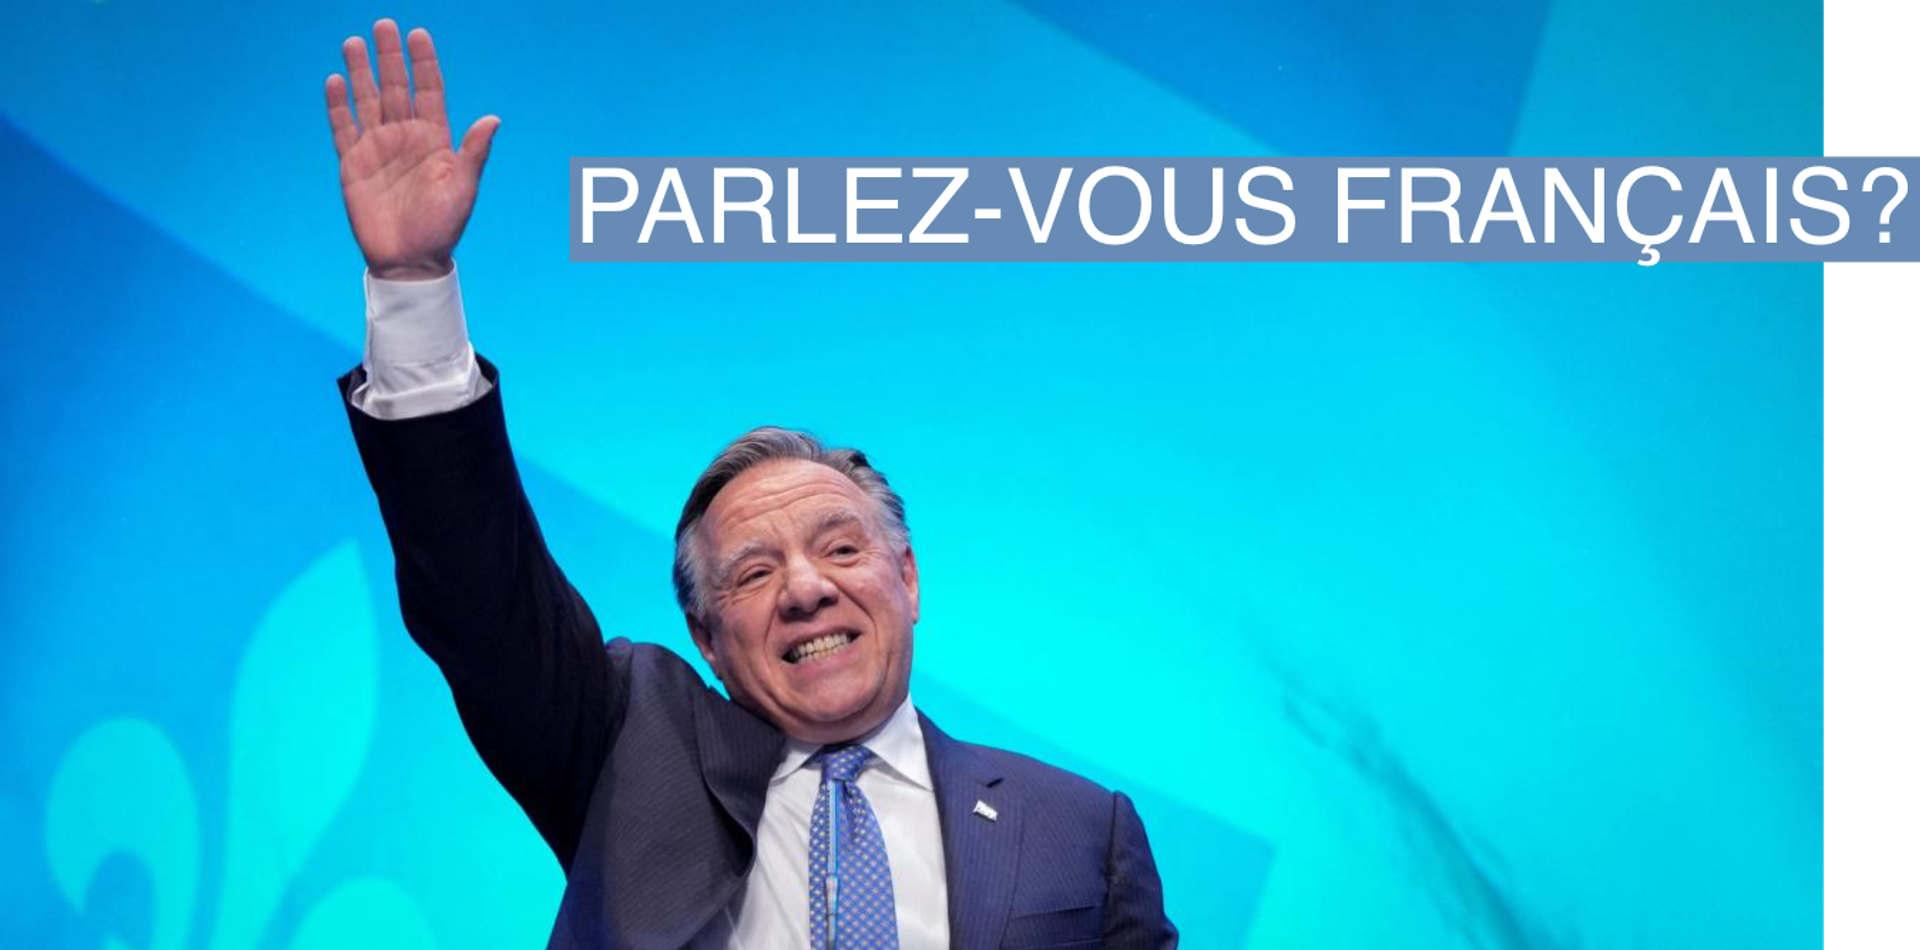 Quebec’s Premier Francois Legault waves to supporters at the Coalition Avenir Quebec (CAQ) election night victory party in Quebec City, Quebec, Canada on October 3, 2022.